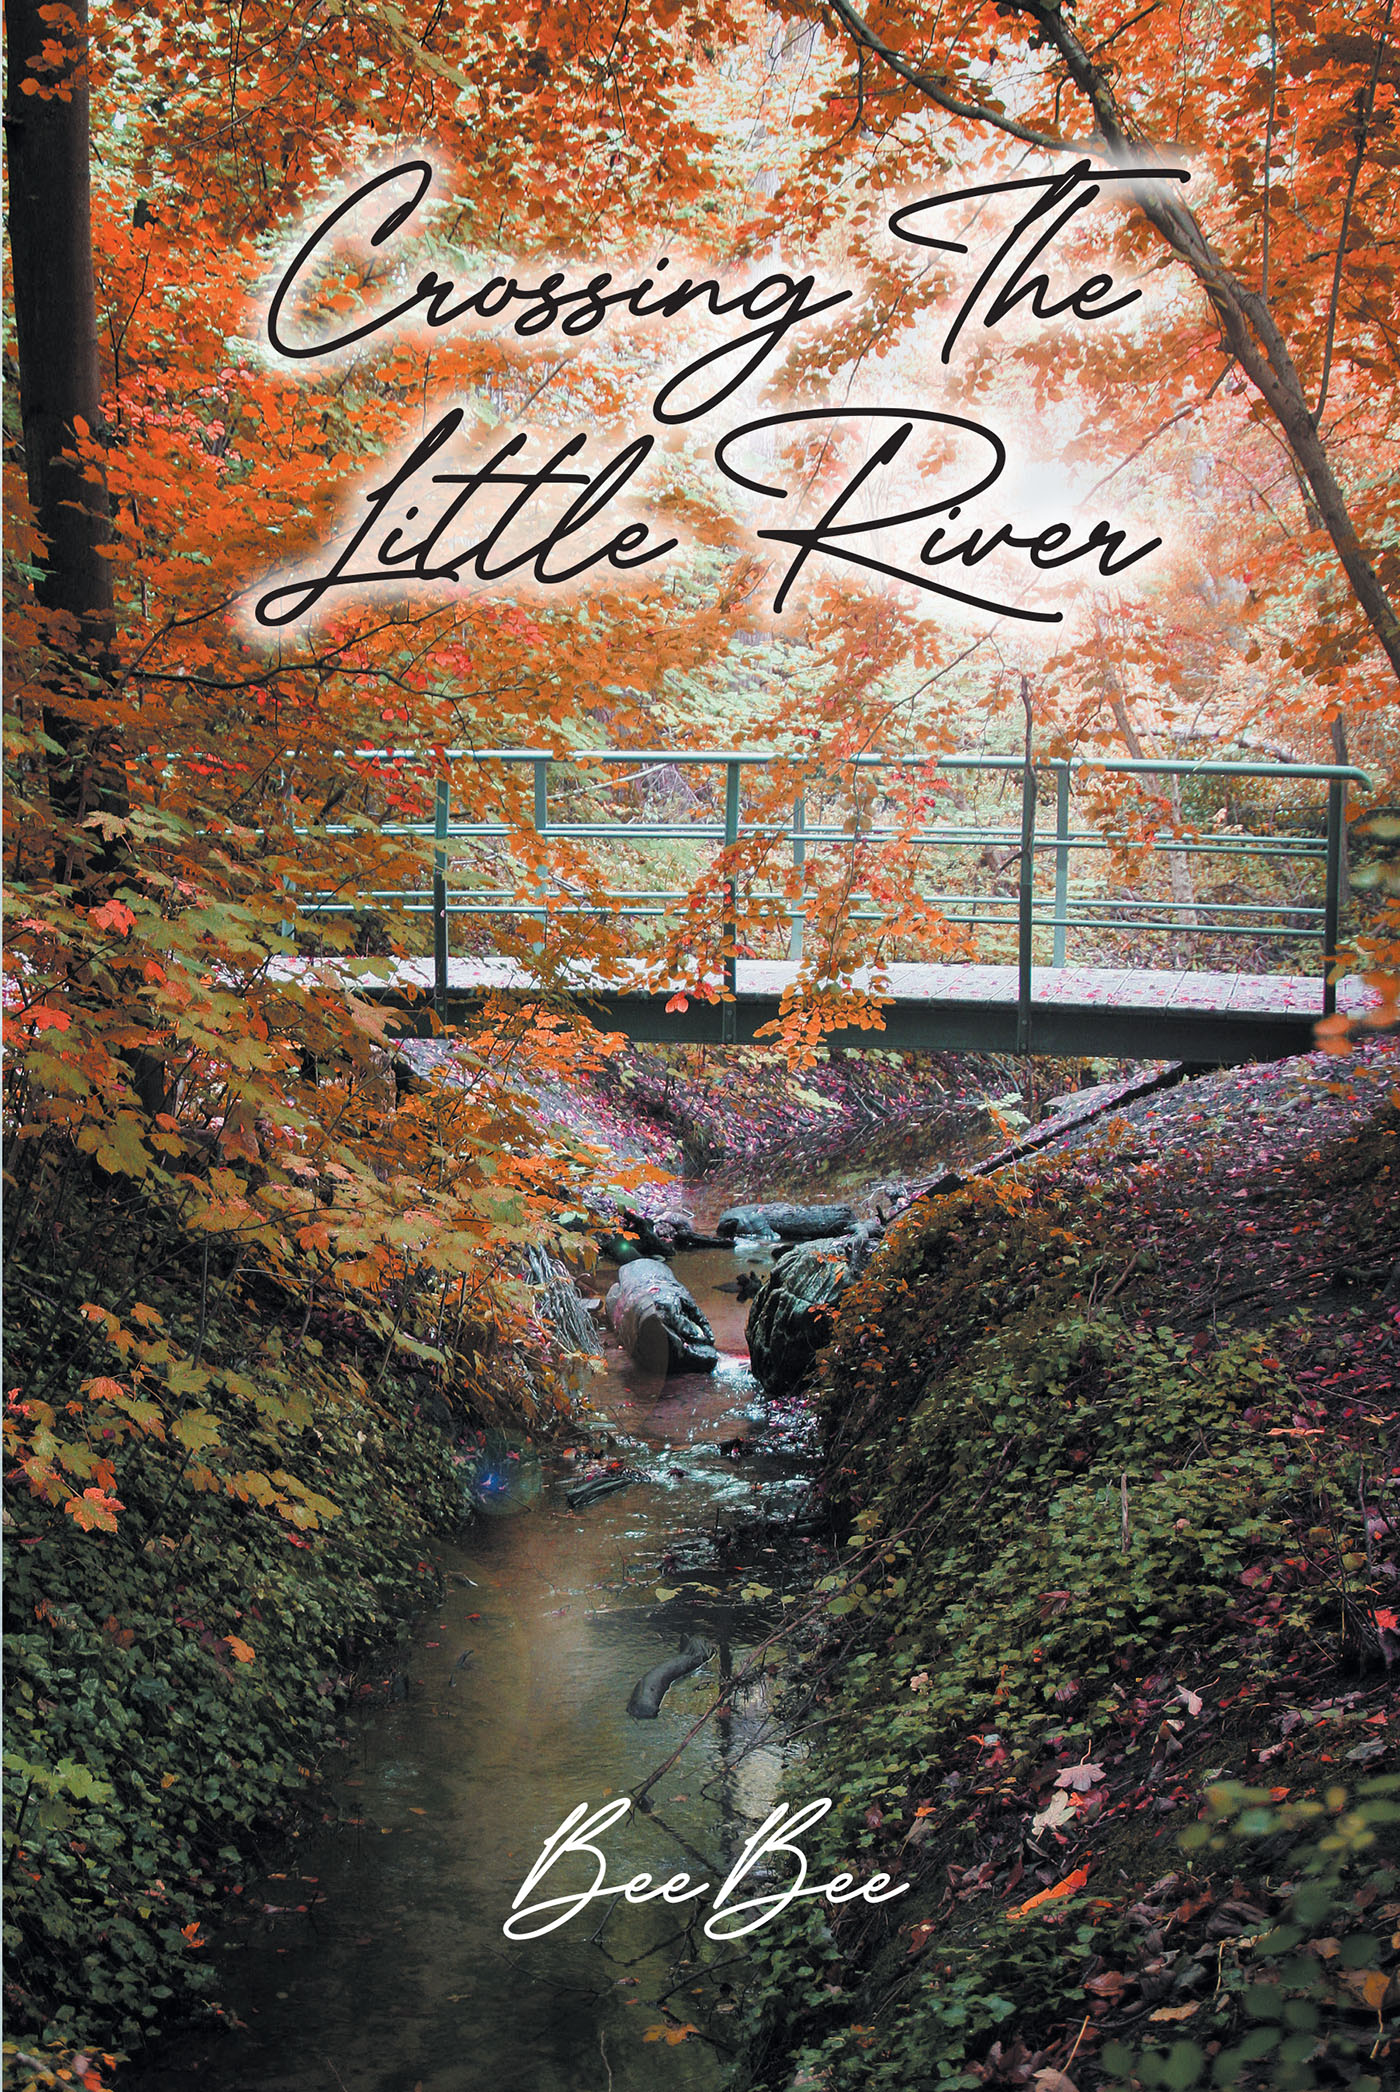 BeeBee’s Newly Released "Crossing The Little River" is a Vividly Detailed Account of a Woman’s Journey Through Life